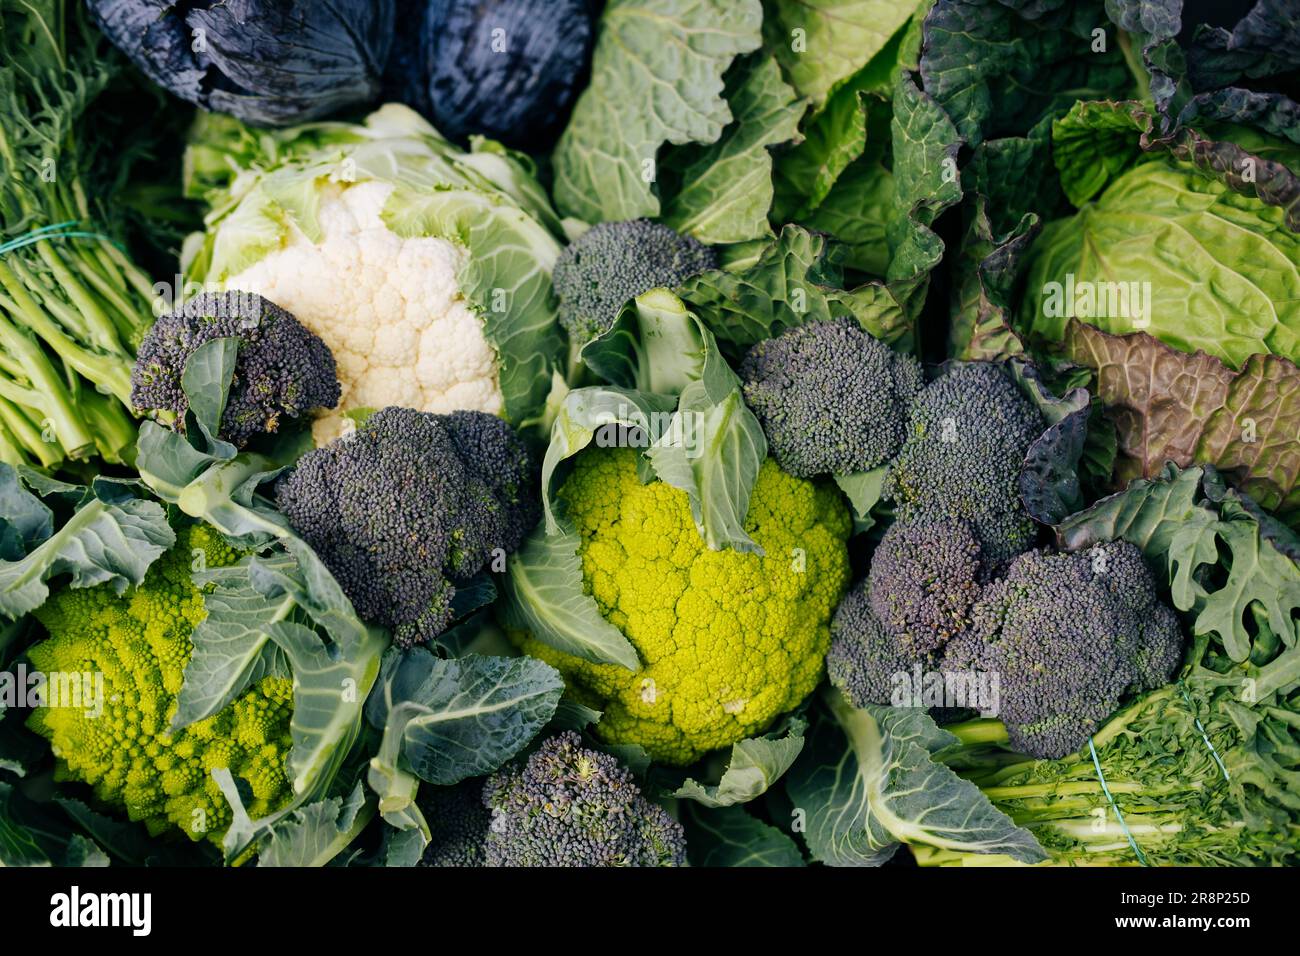 view Alamy Photo Stock market of eco broccoli in cauliflower, cabbage many and green and - bio Top photo